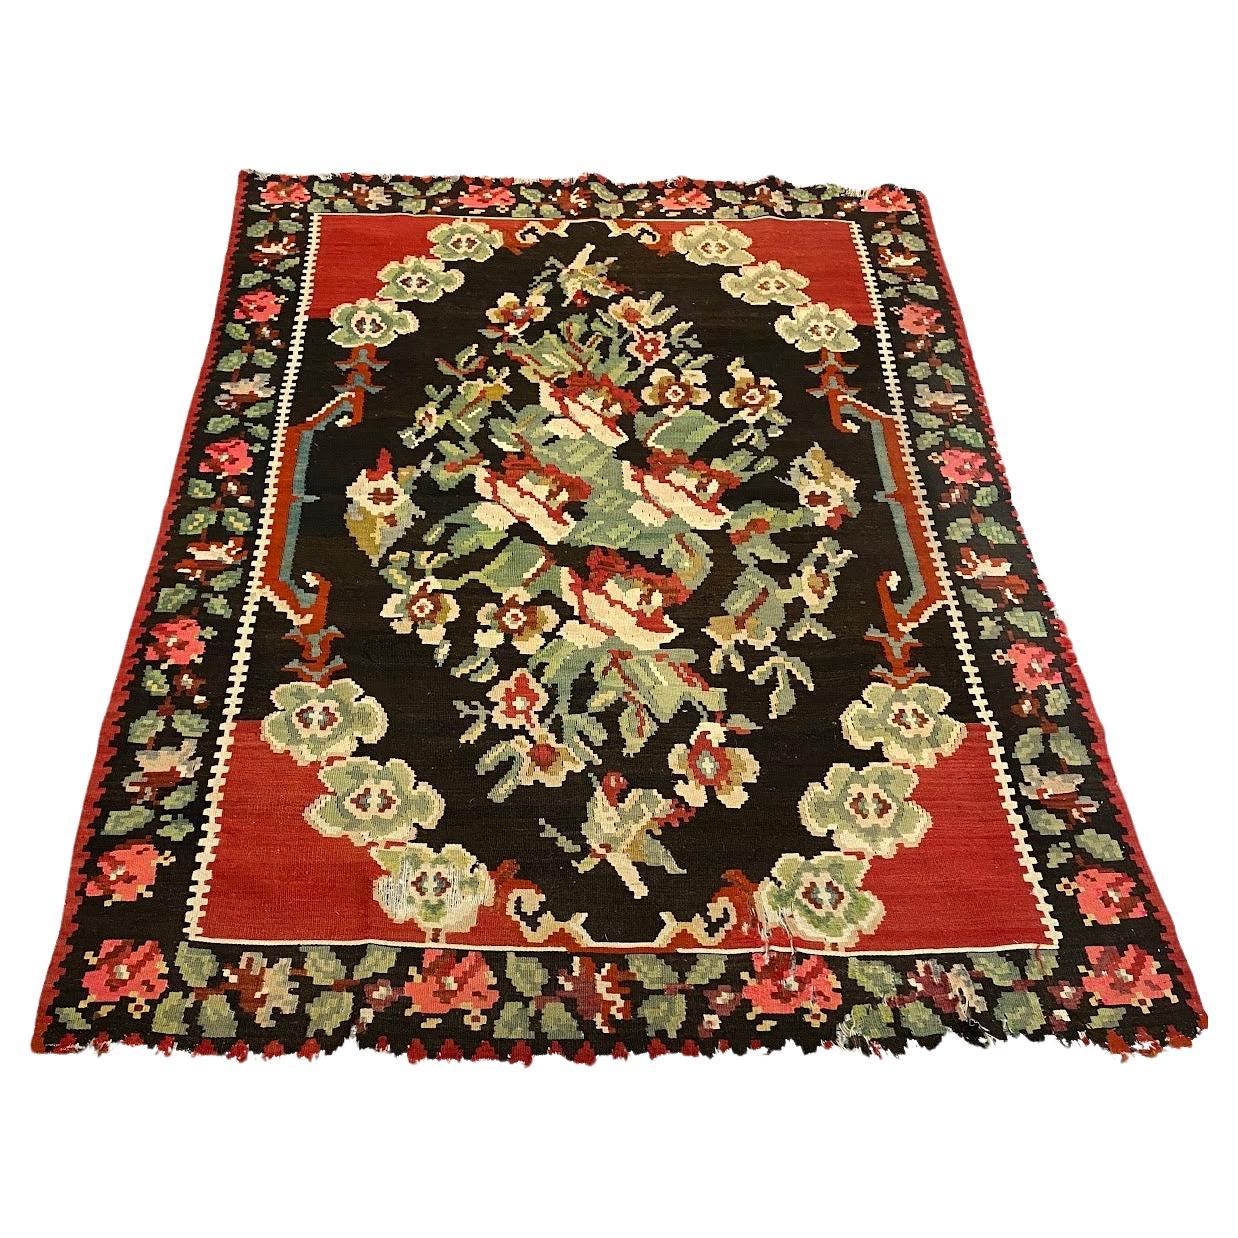  Vintage Floral Flatweave Rug in Red, Black, Brown, Green and Yellow For Sale